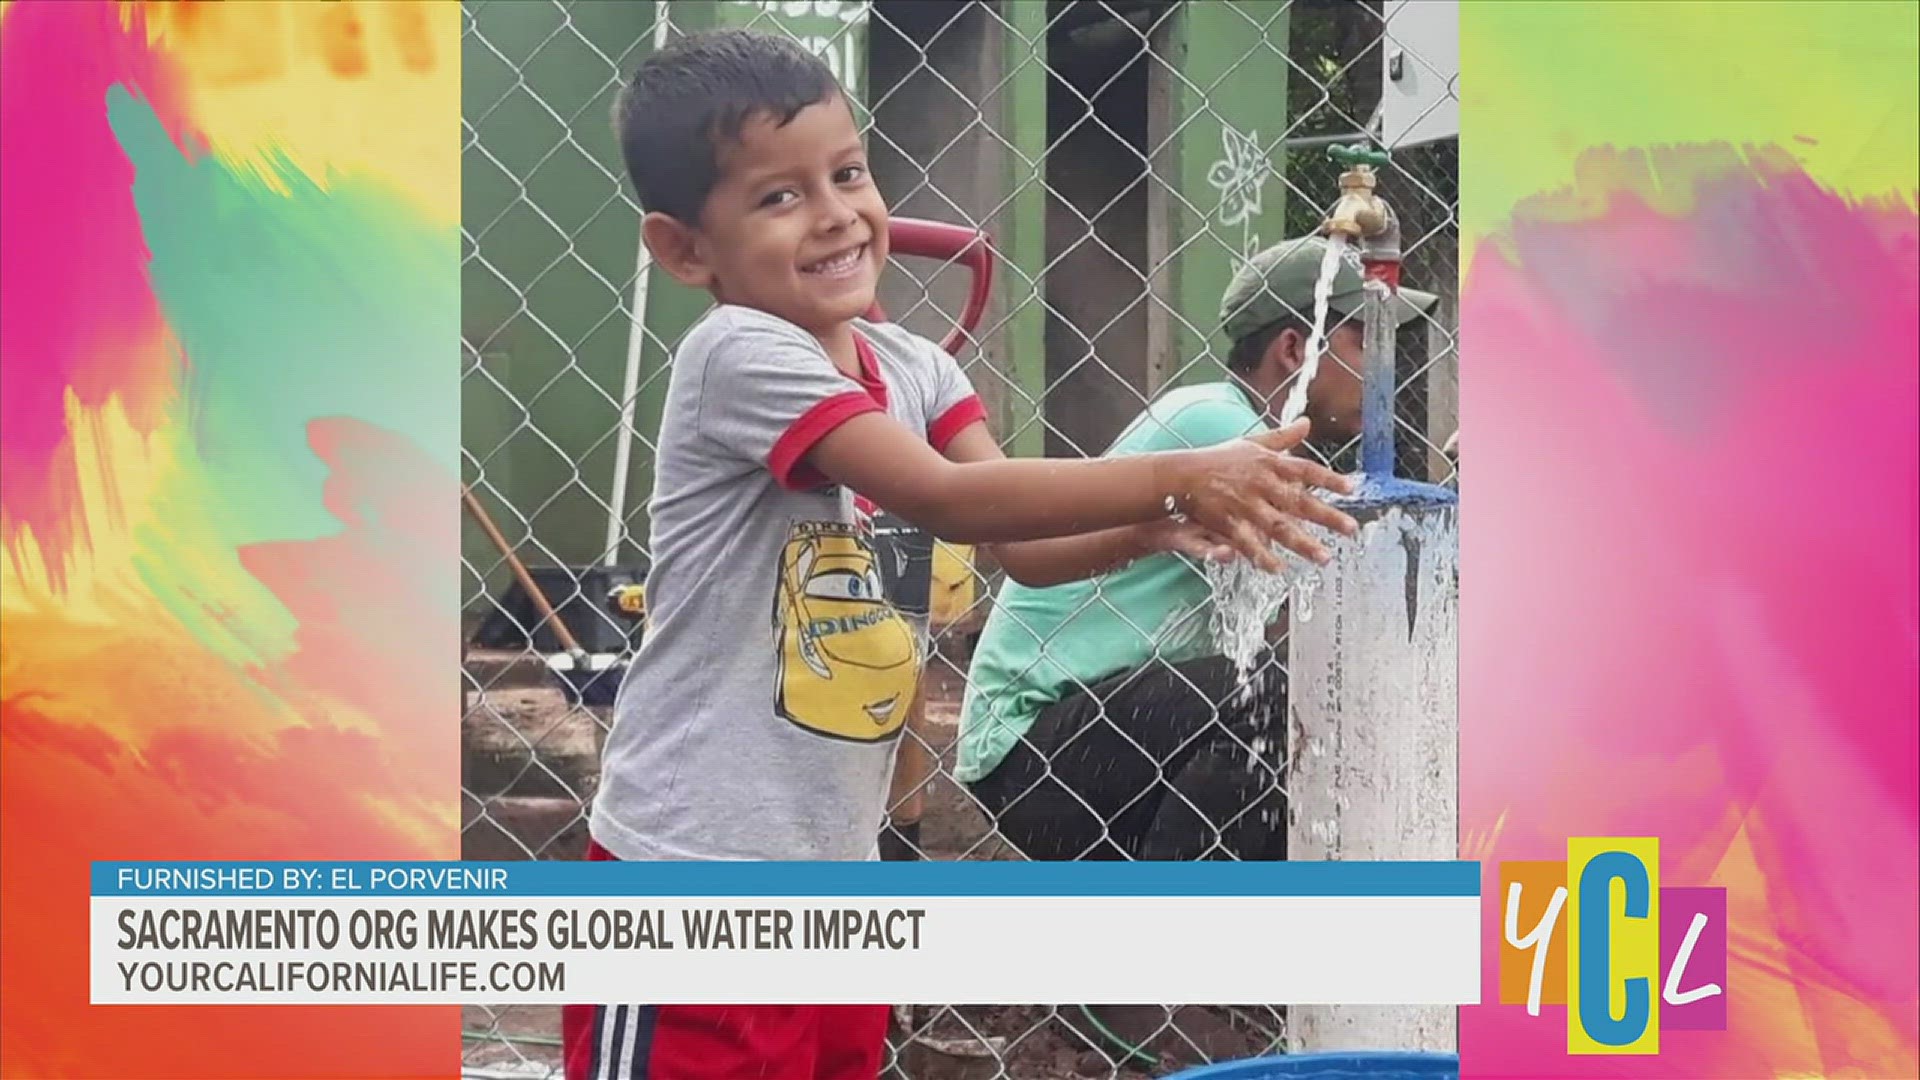 El Porvenir works on projects in Nicaragua, focusing on how access to clean water can be life changing for communities. See how this group is making an impact.